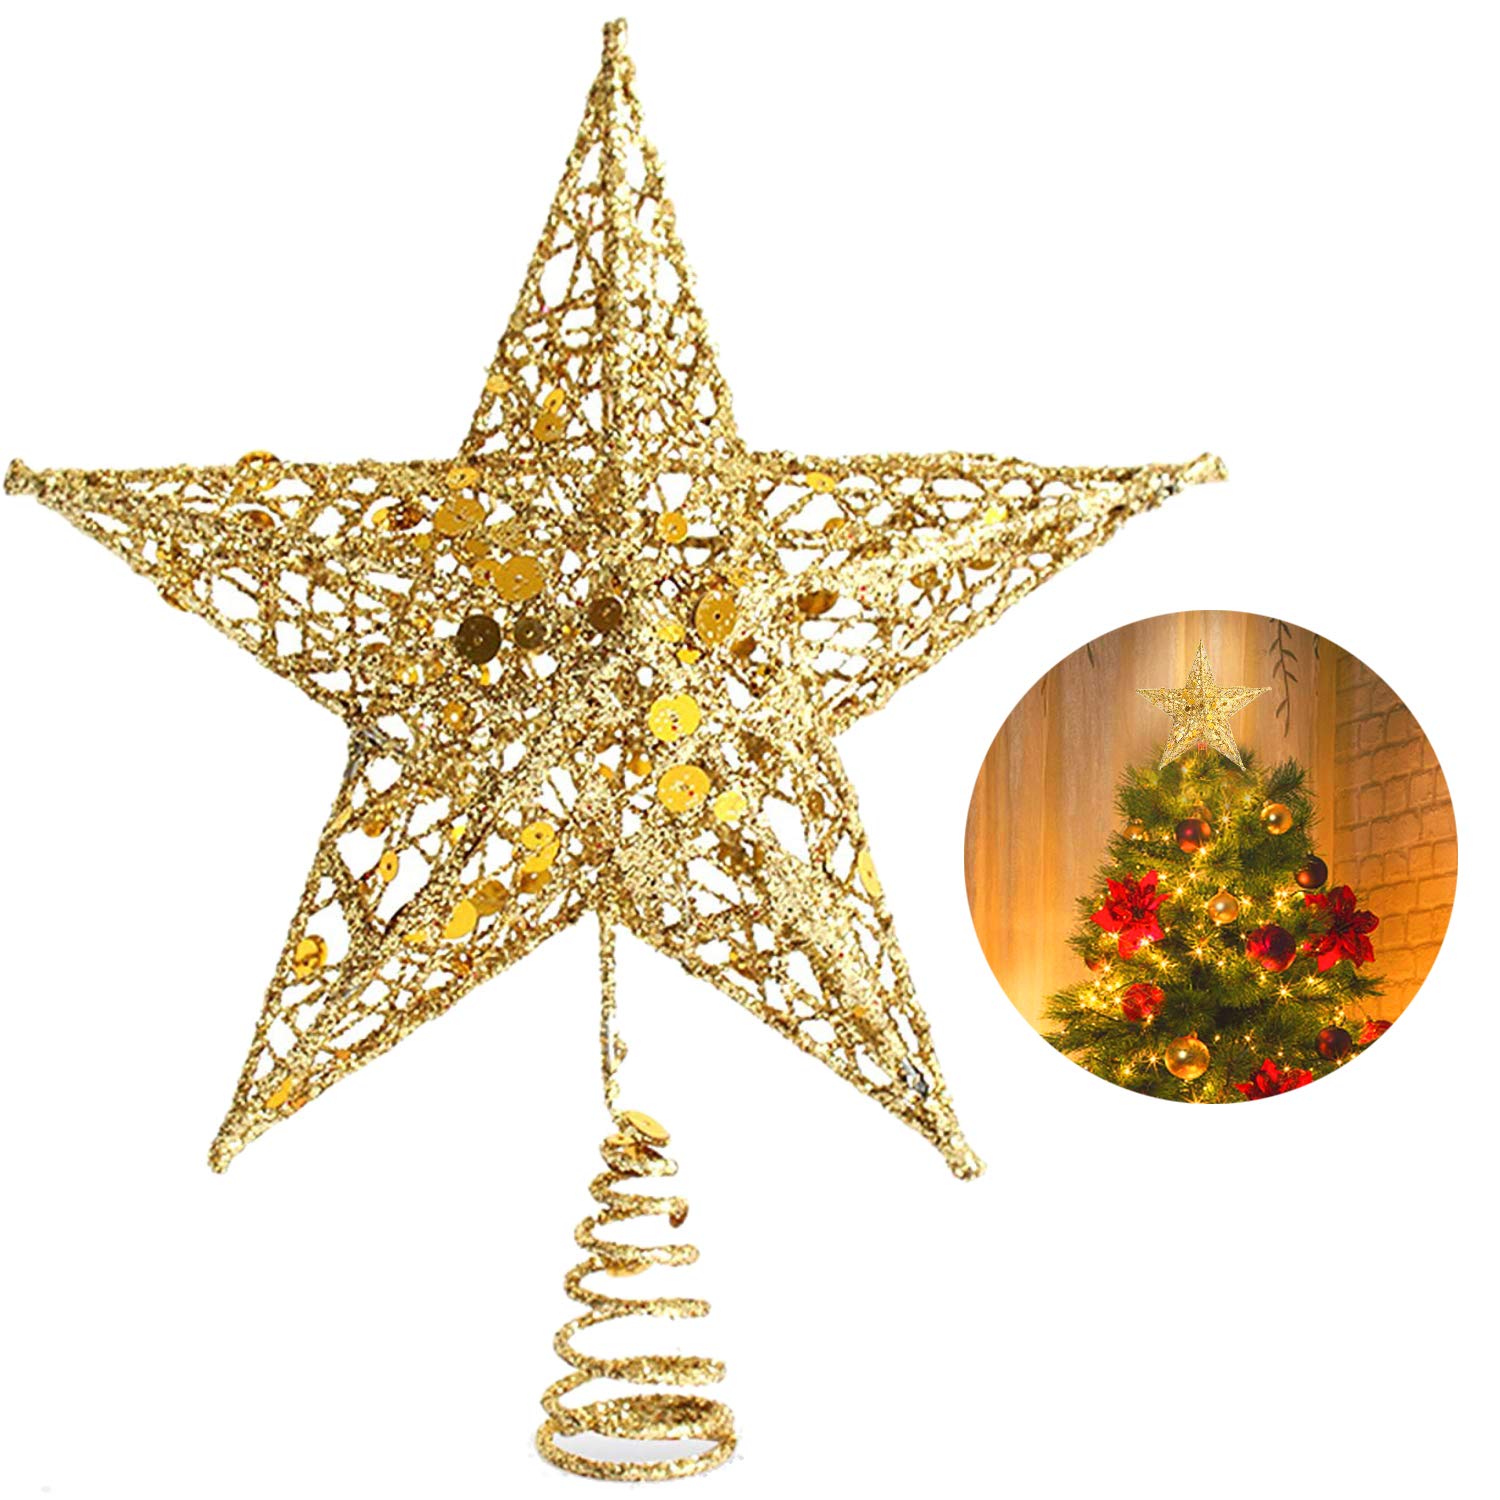 NUOBESTY 25 x 30cm Christmas Tree Ornaments Hollow Out Light Christmas Treetop Star Christmas Tree Topper Star for Home Office Party Shopping Mall Golden 